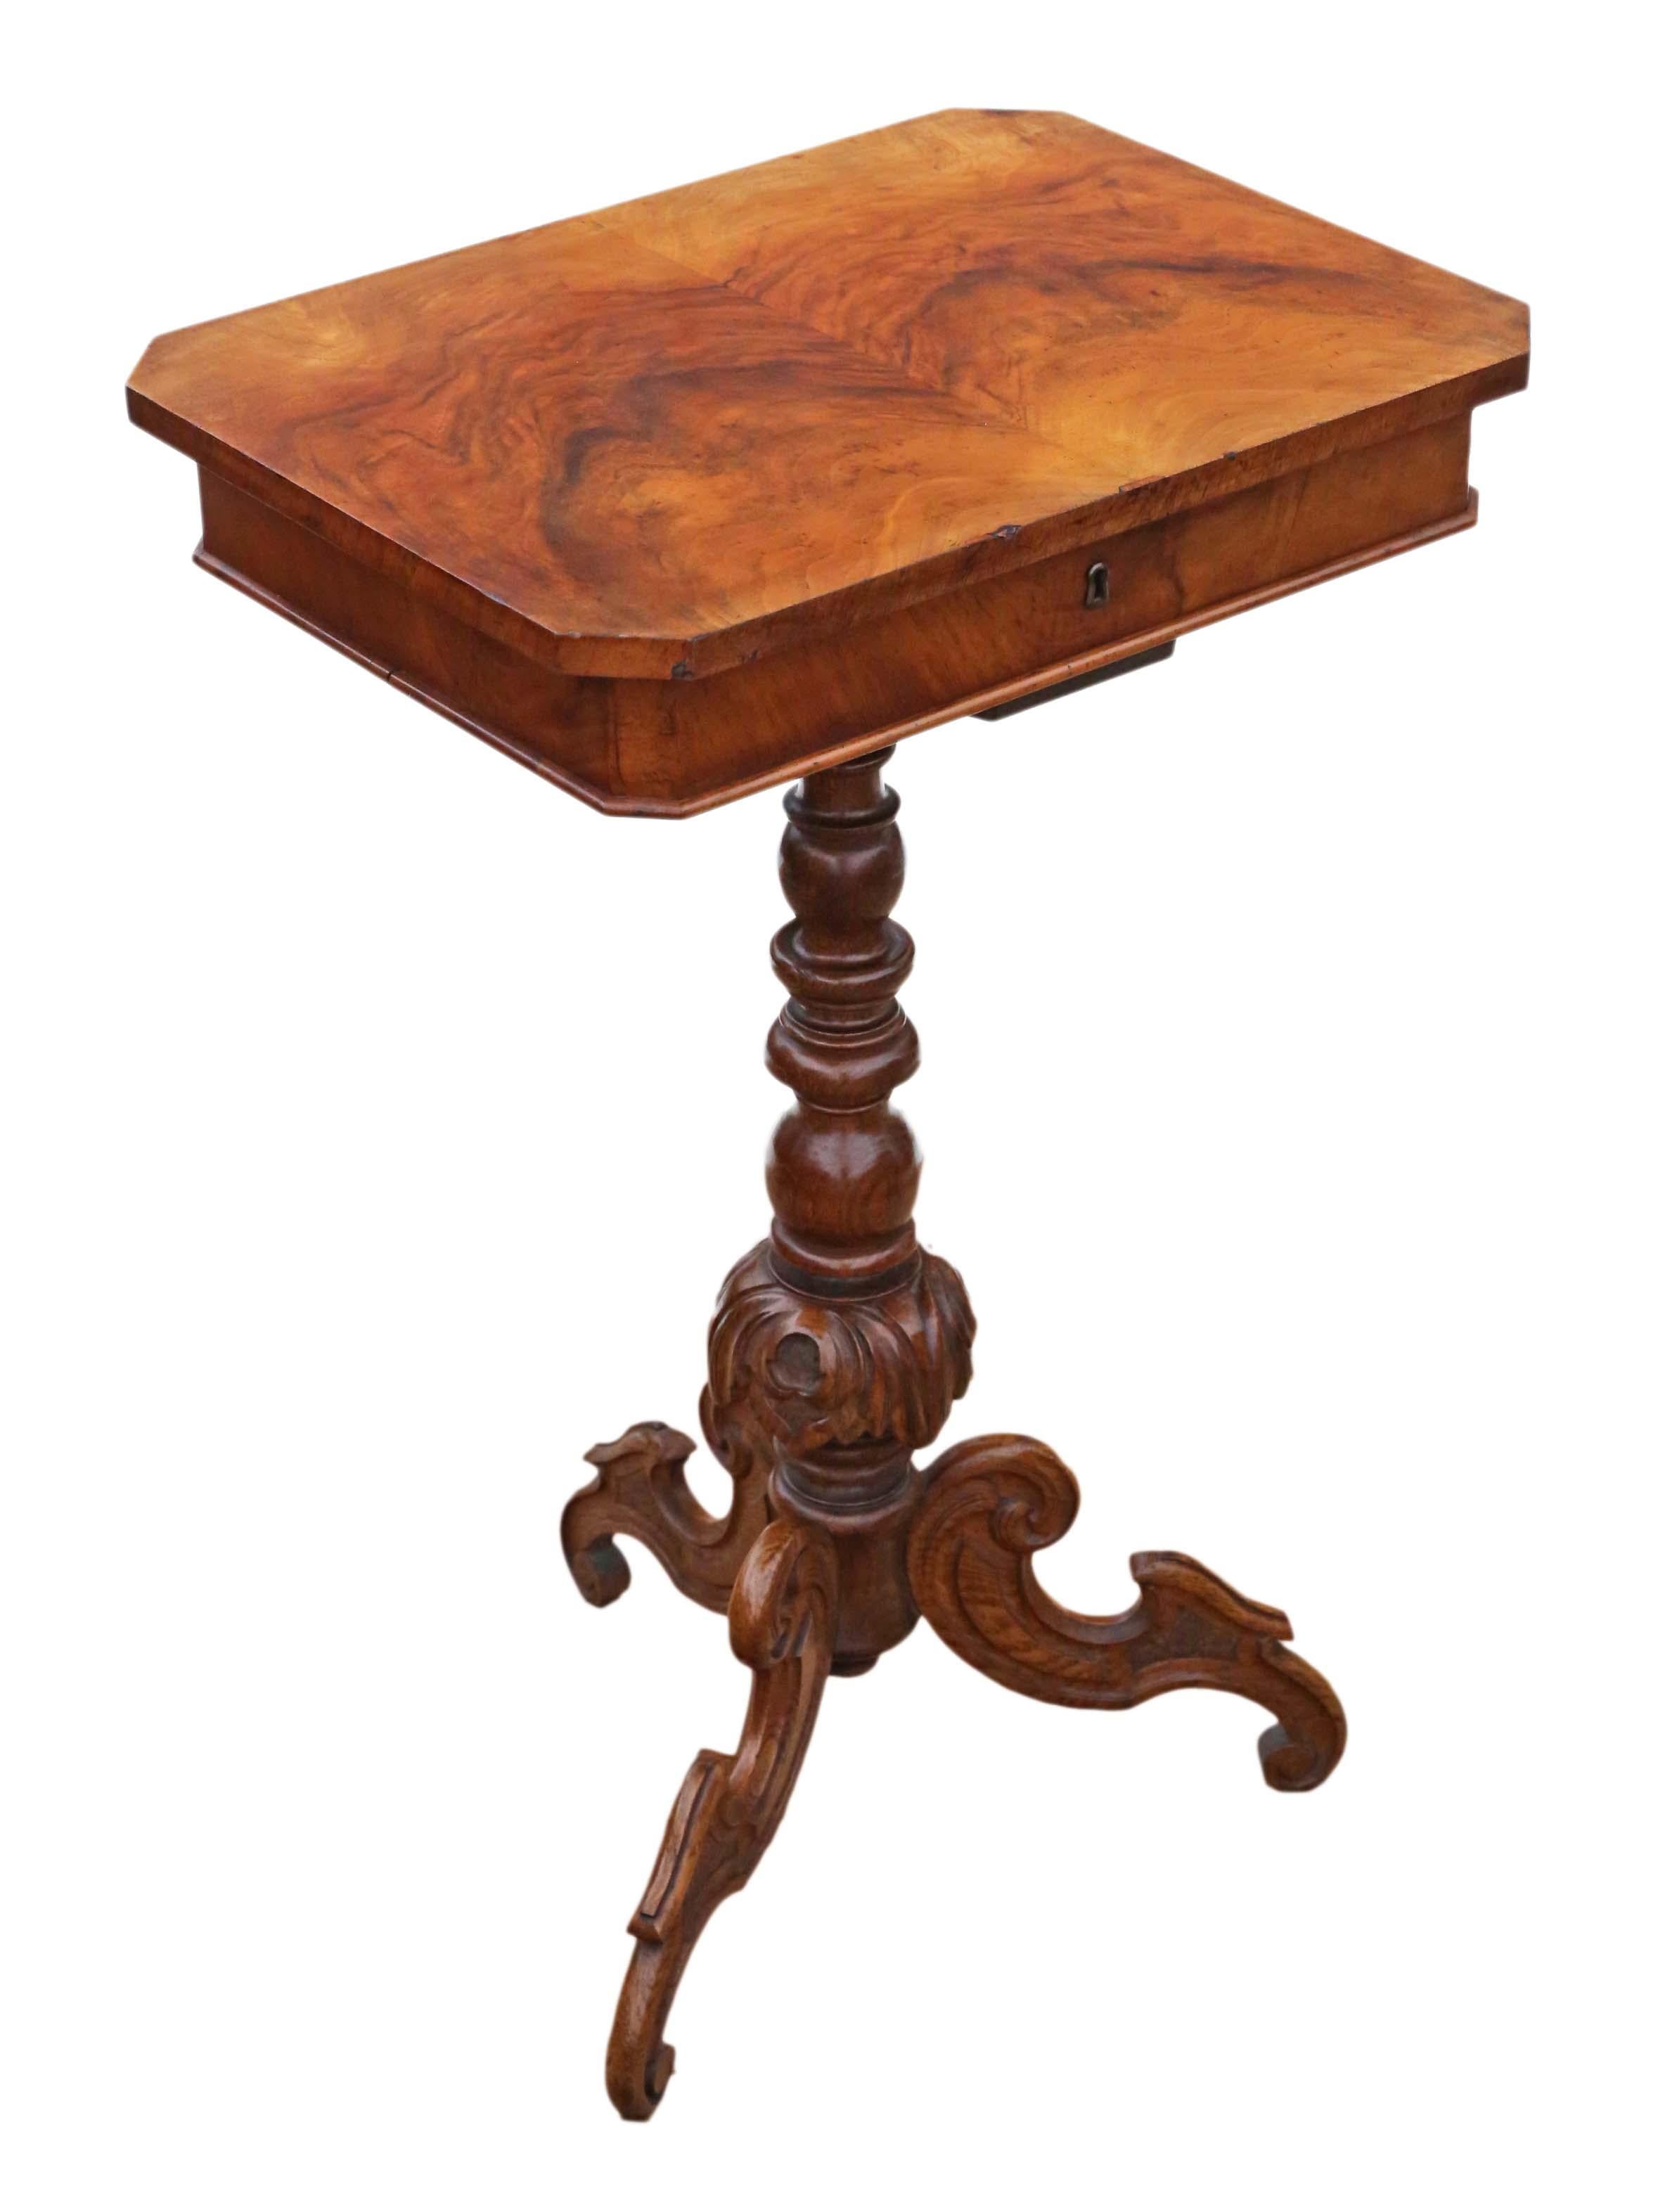 Antique Victorian circa 1860 Burr Walnut Work Side Sewing Table Box For Sale 1